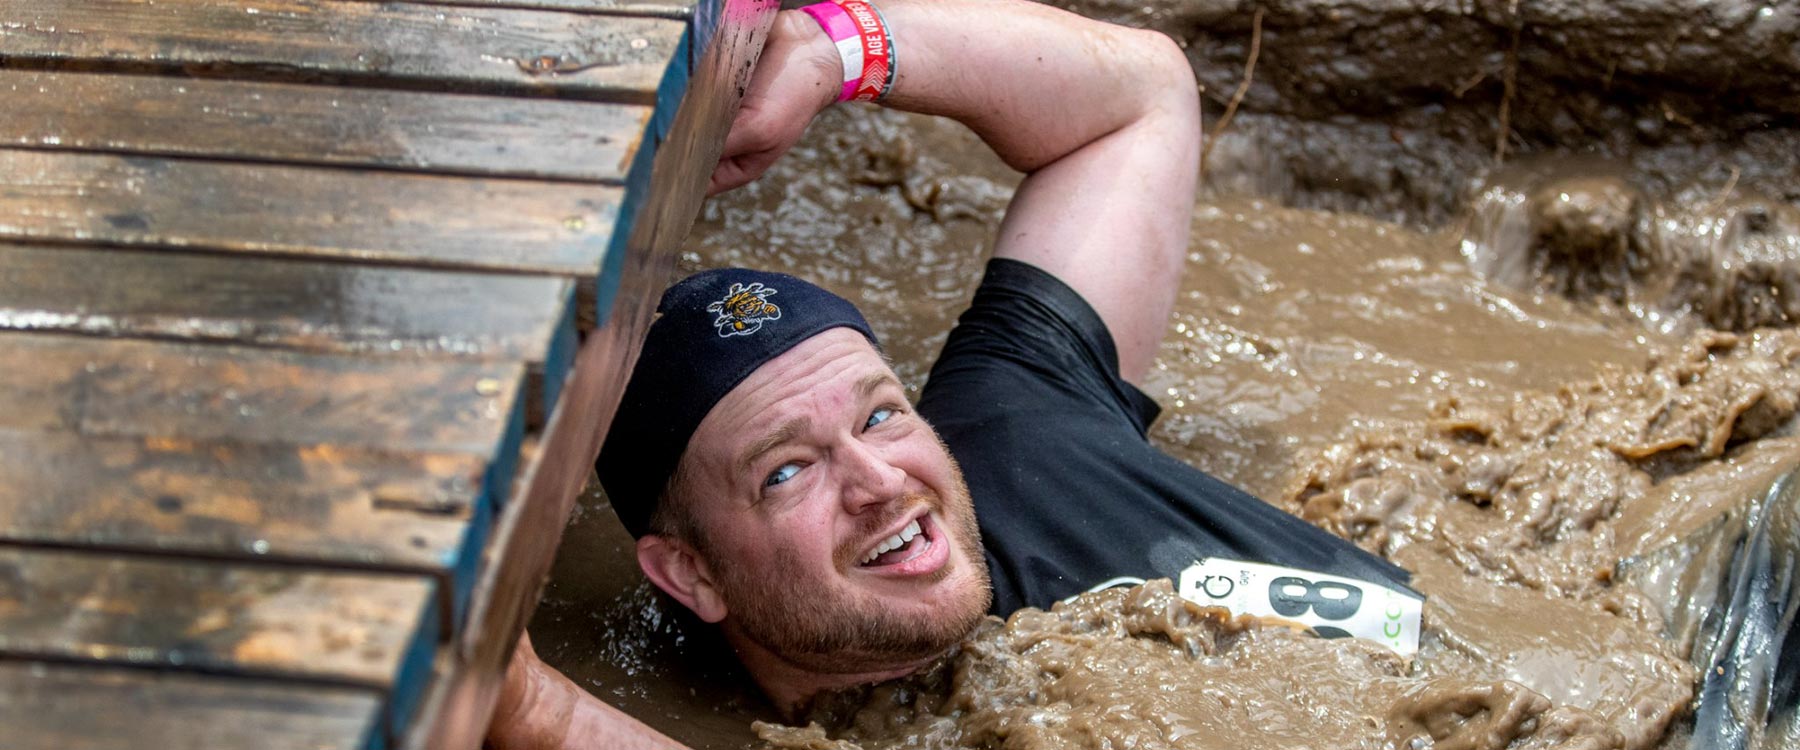 Man Dragging Himself Through a Muddy Obstacle